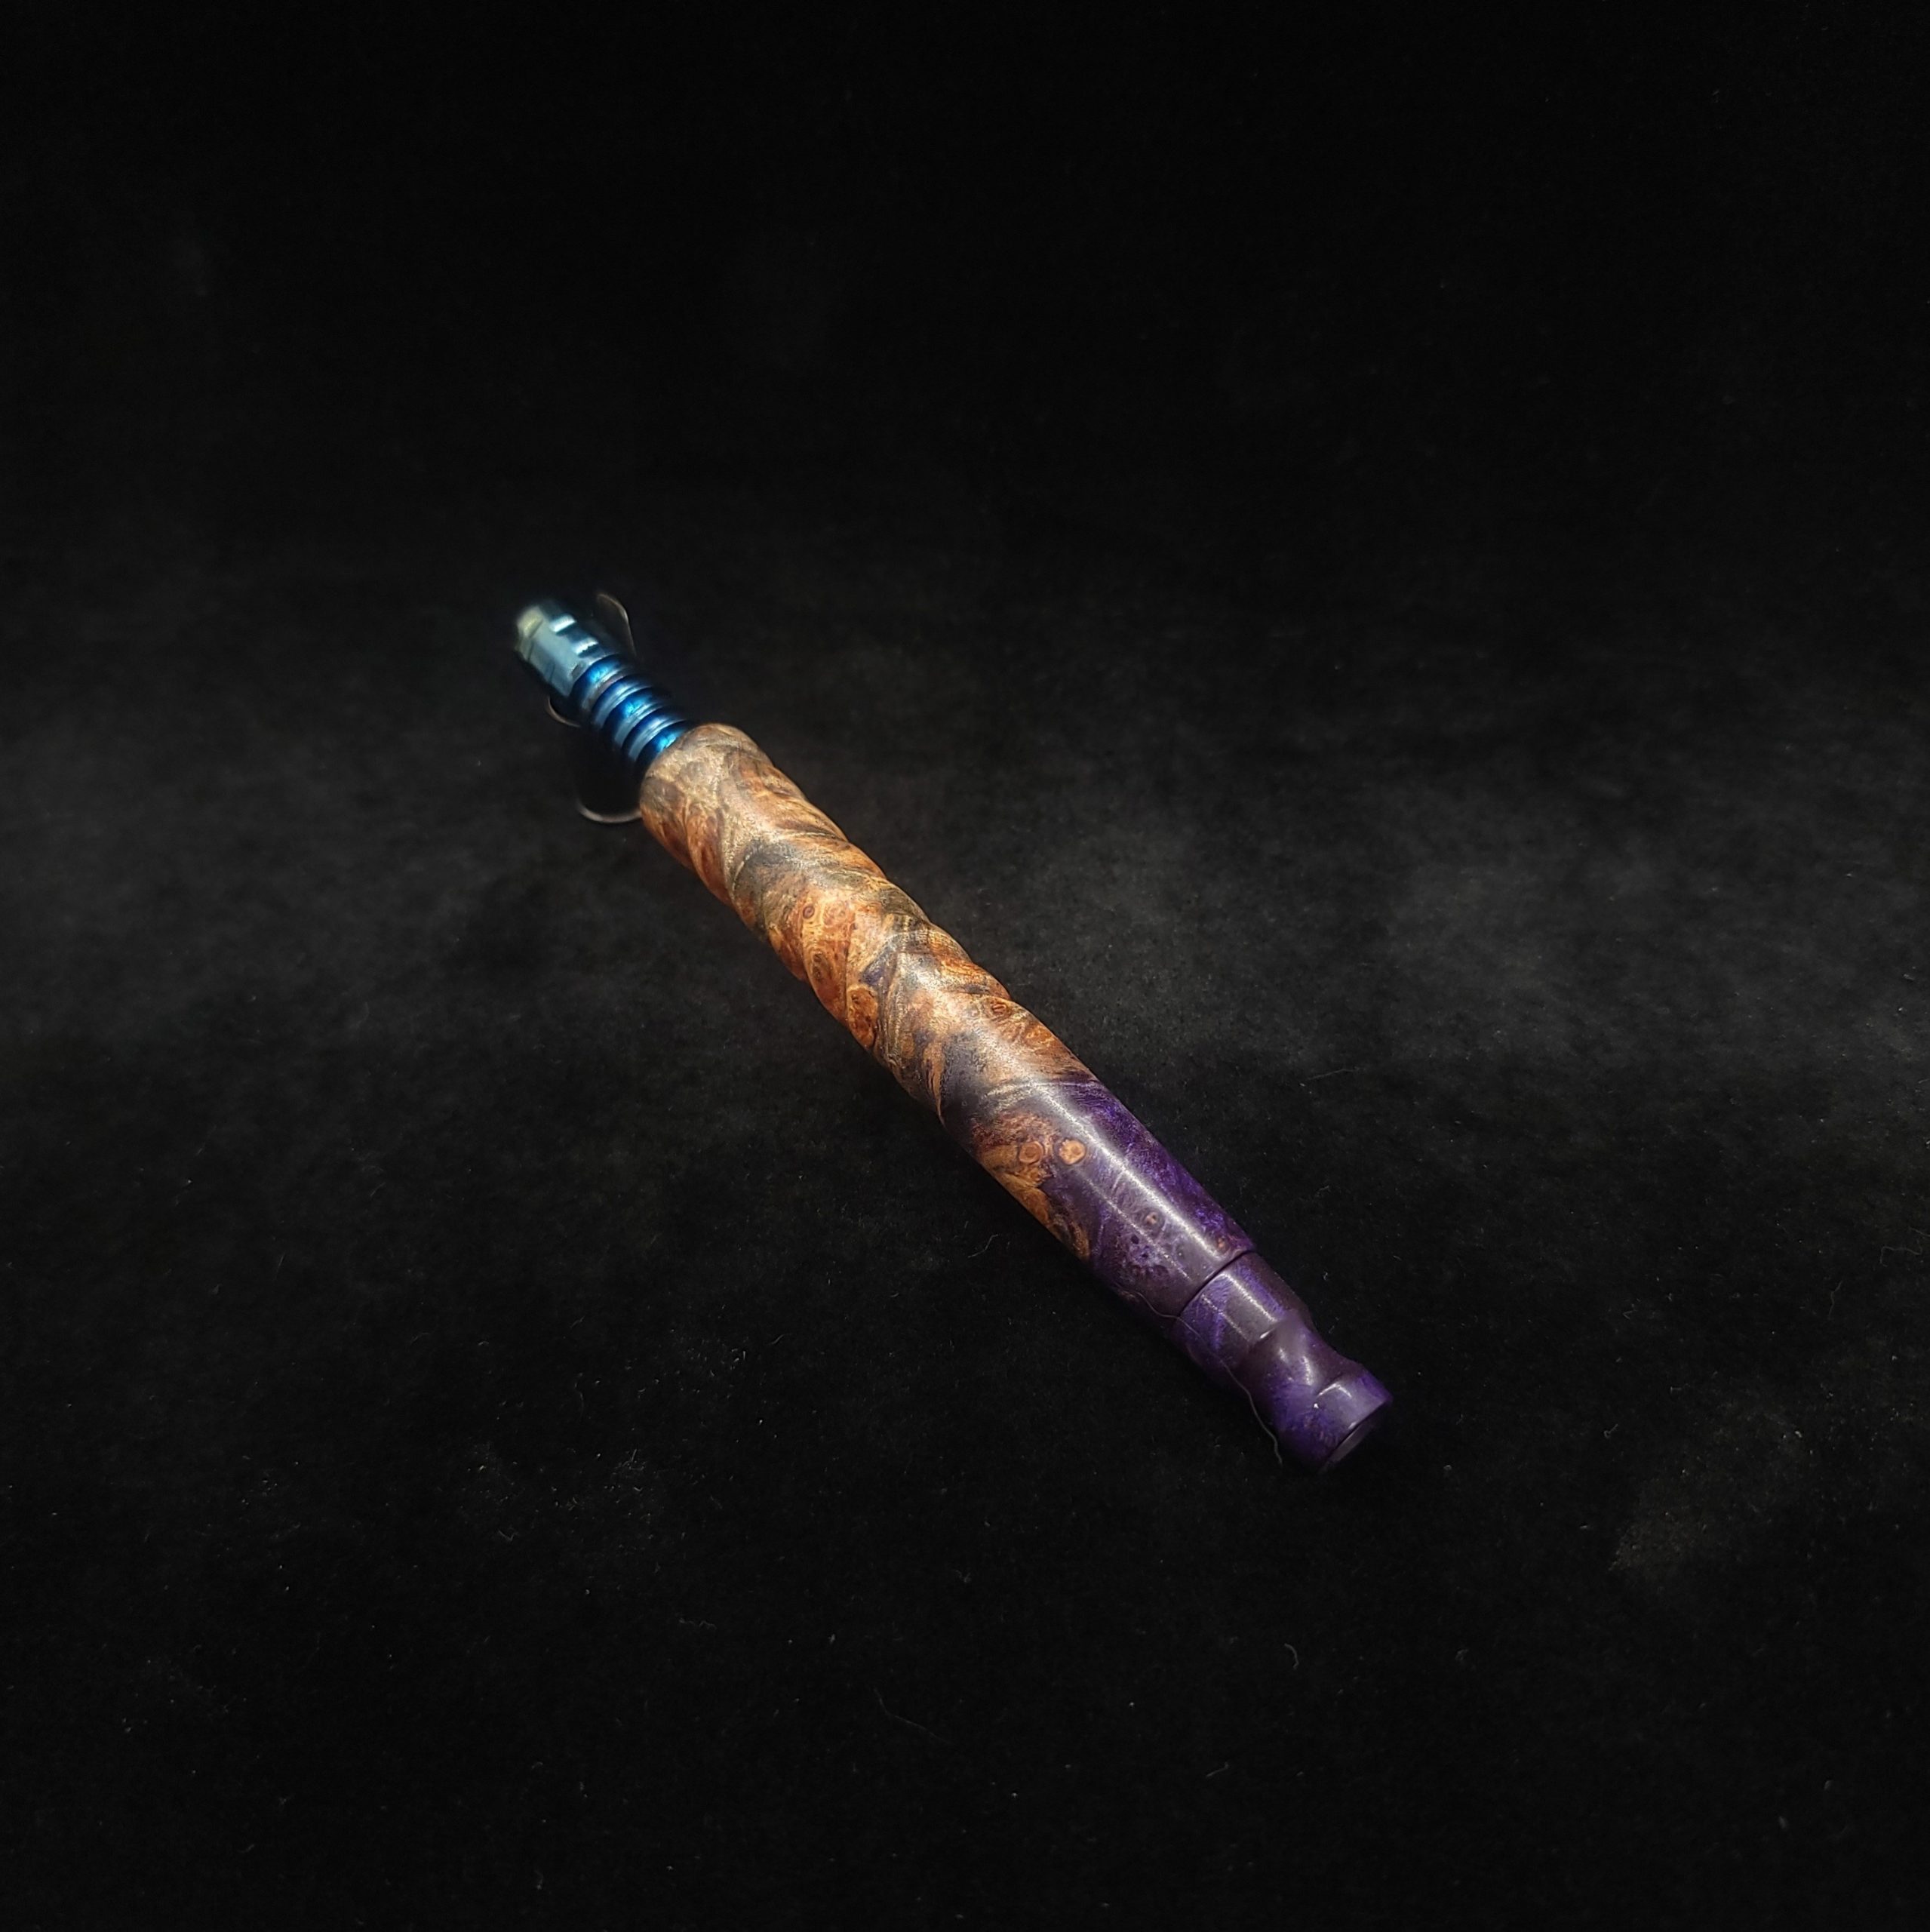 This image portrays Cosmic Burl-Eclipse XL Dynavap Stem Matching w/Mouthpiece by Dovetail Woodwork.